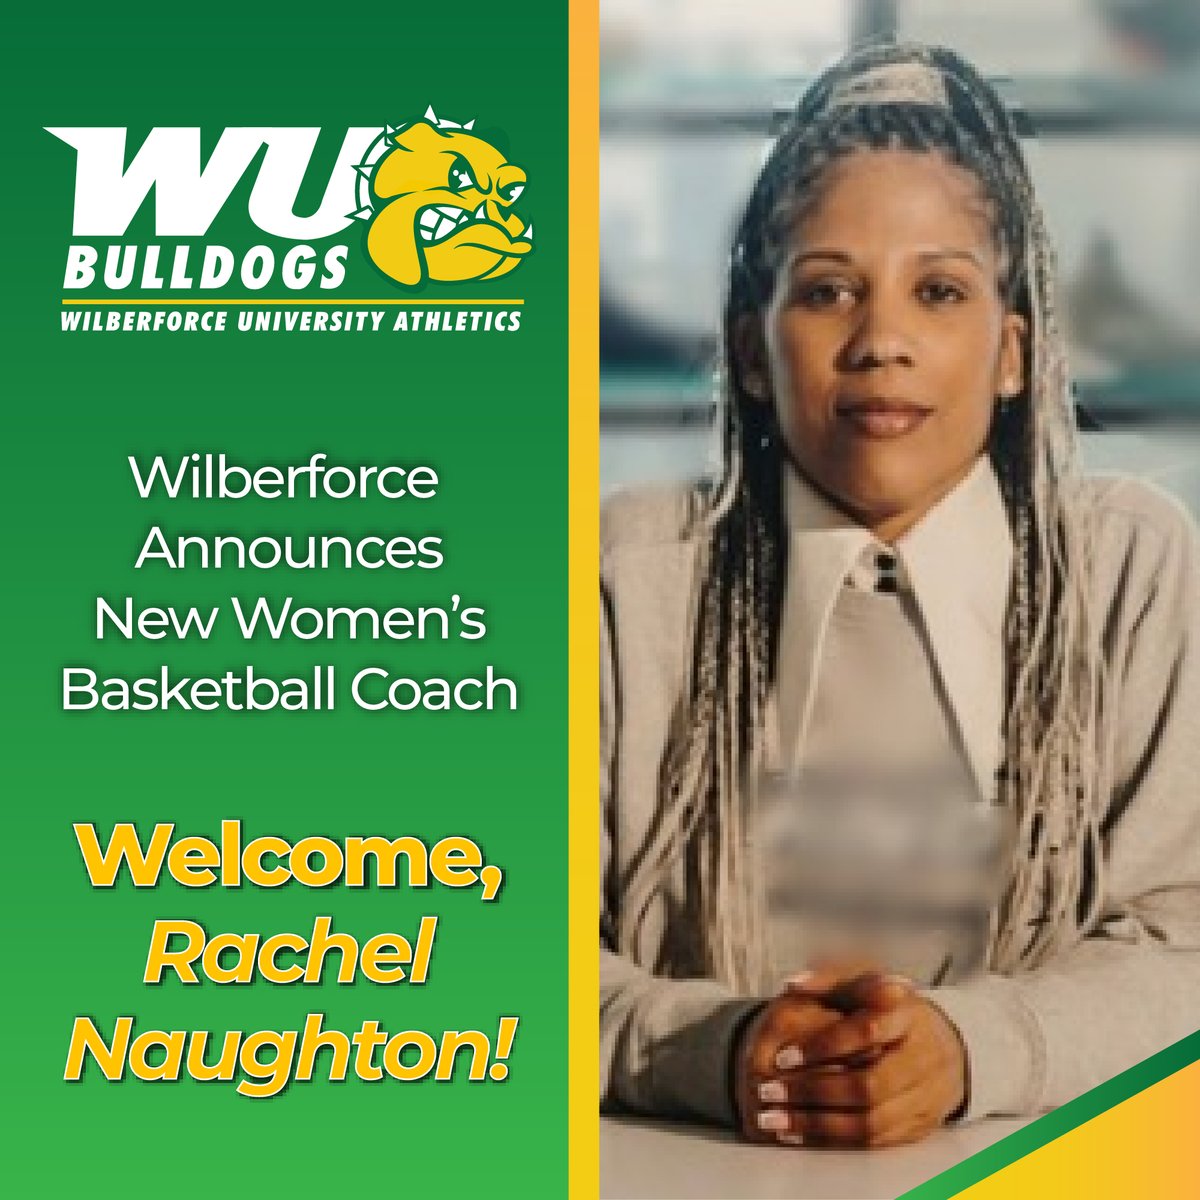 Beginning in the ‘24-‘25 sports season, there will be a new name added to the Wilberforce University athletics coaching staff. This year, the Lady Bulldogs basketball team will be led by Rachel Naughton! Learn More: loom.ly/H7q8ADI #gobulldogs #wu1856 #hbcuproud #HBCU